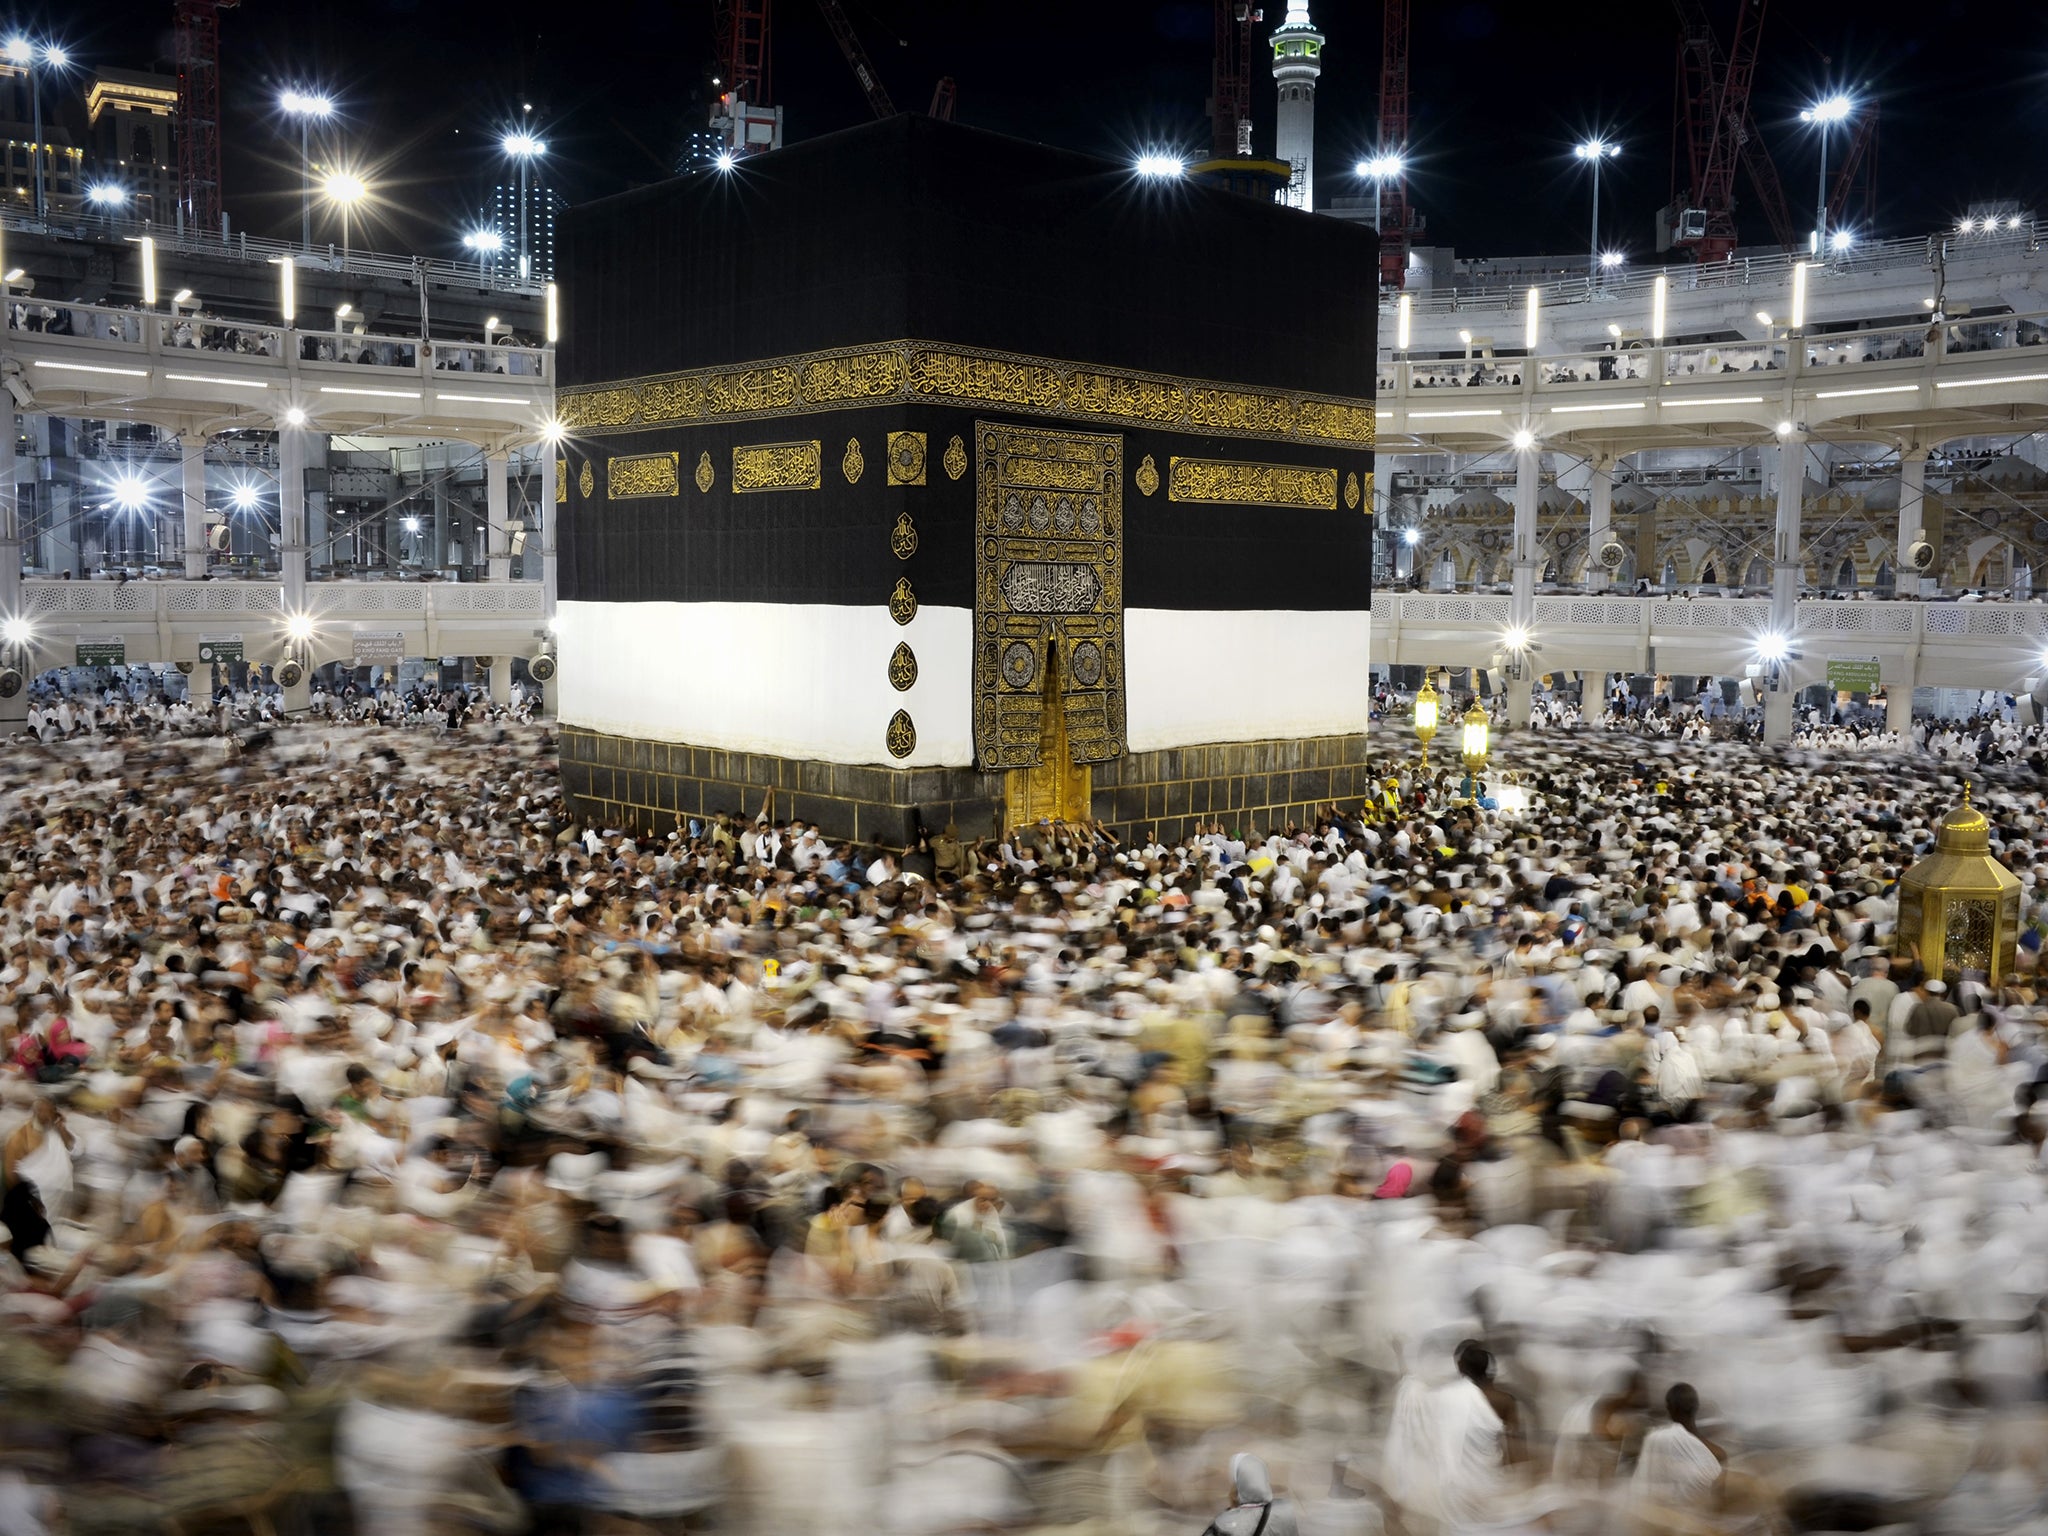 More than two million Muslims make the journey to Mecca each year